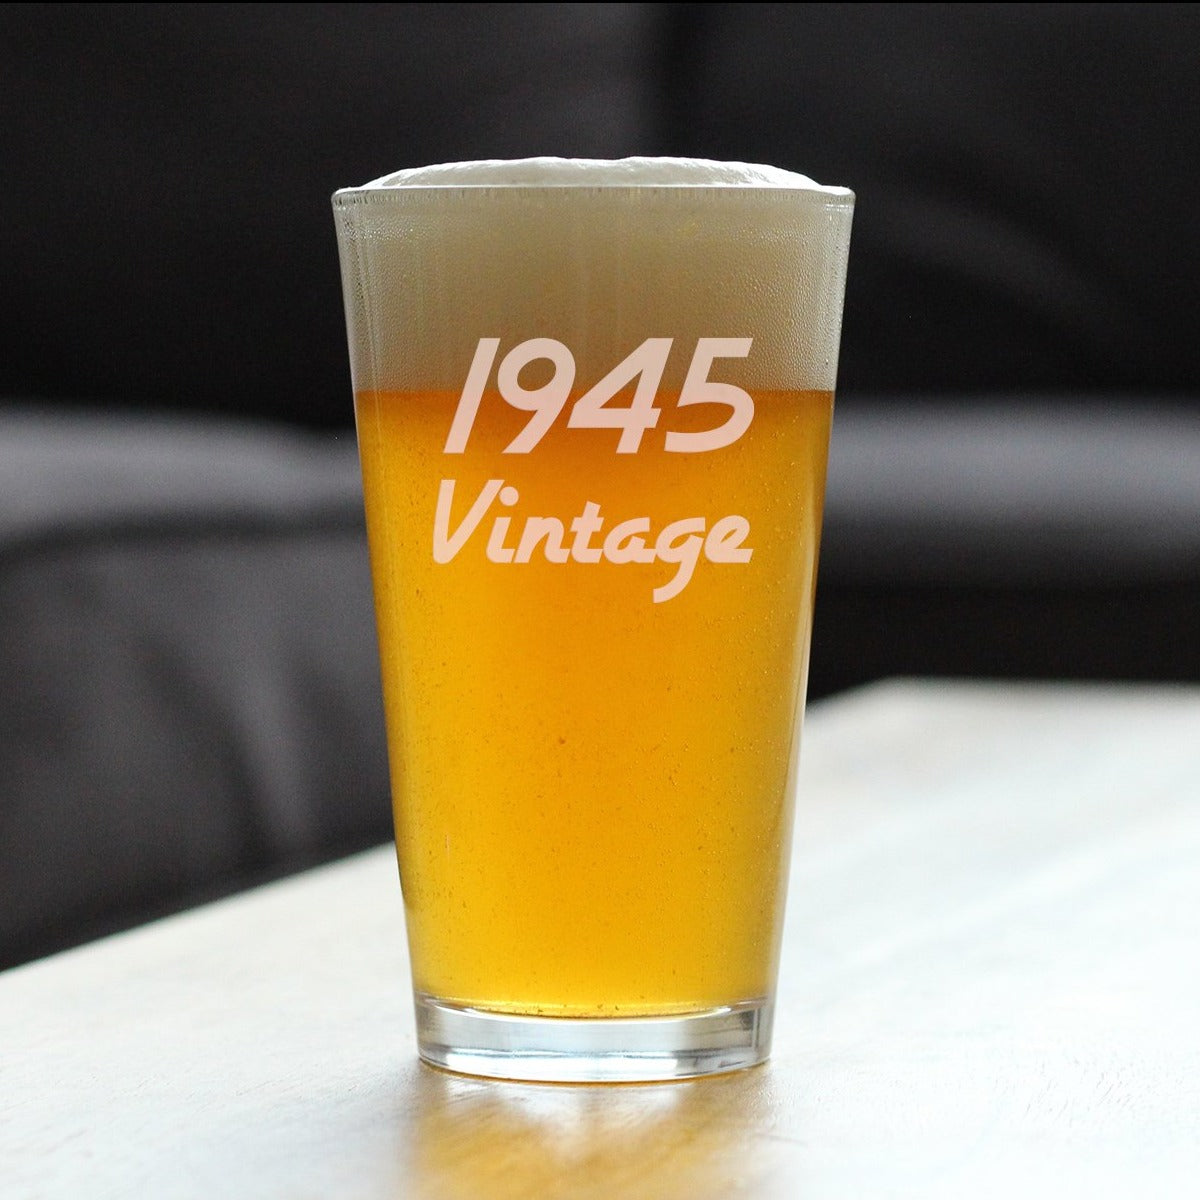 Vintage 1945 - Pint Glass for Beer - 78th Birthday Gifts for Men or Women Turning 78 - Fun Bday Party Decor - 16 oz